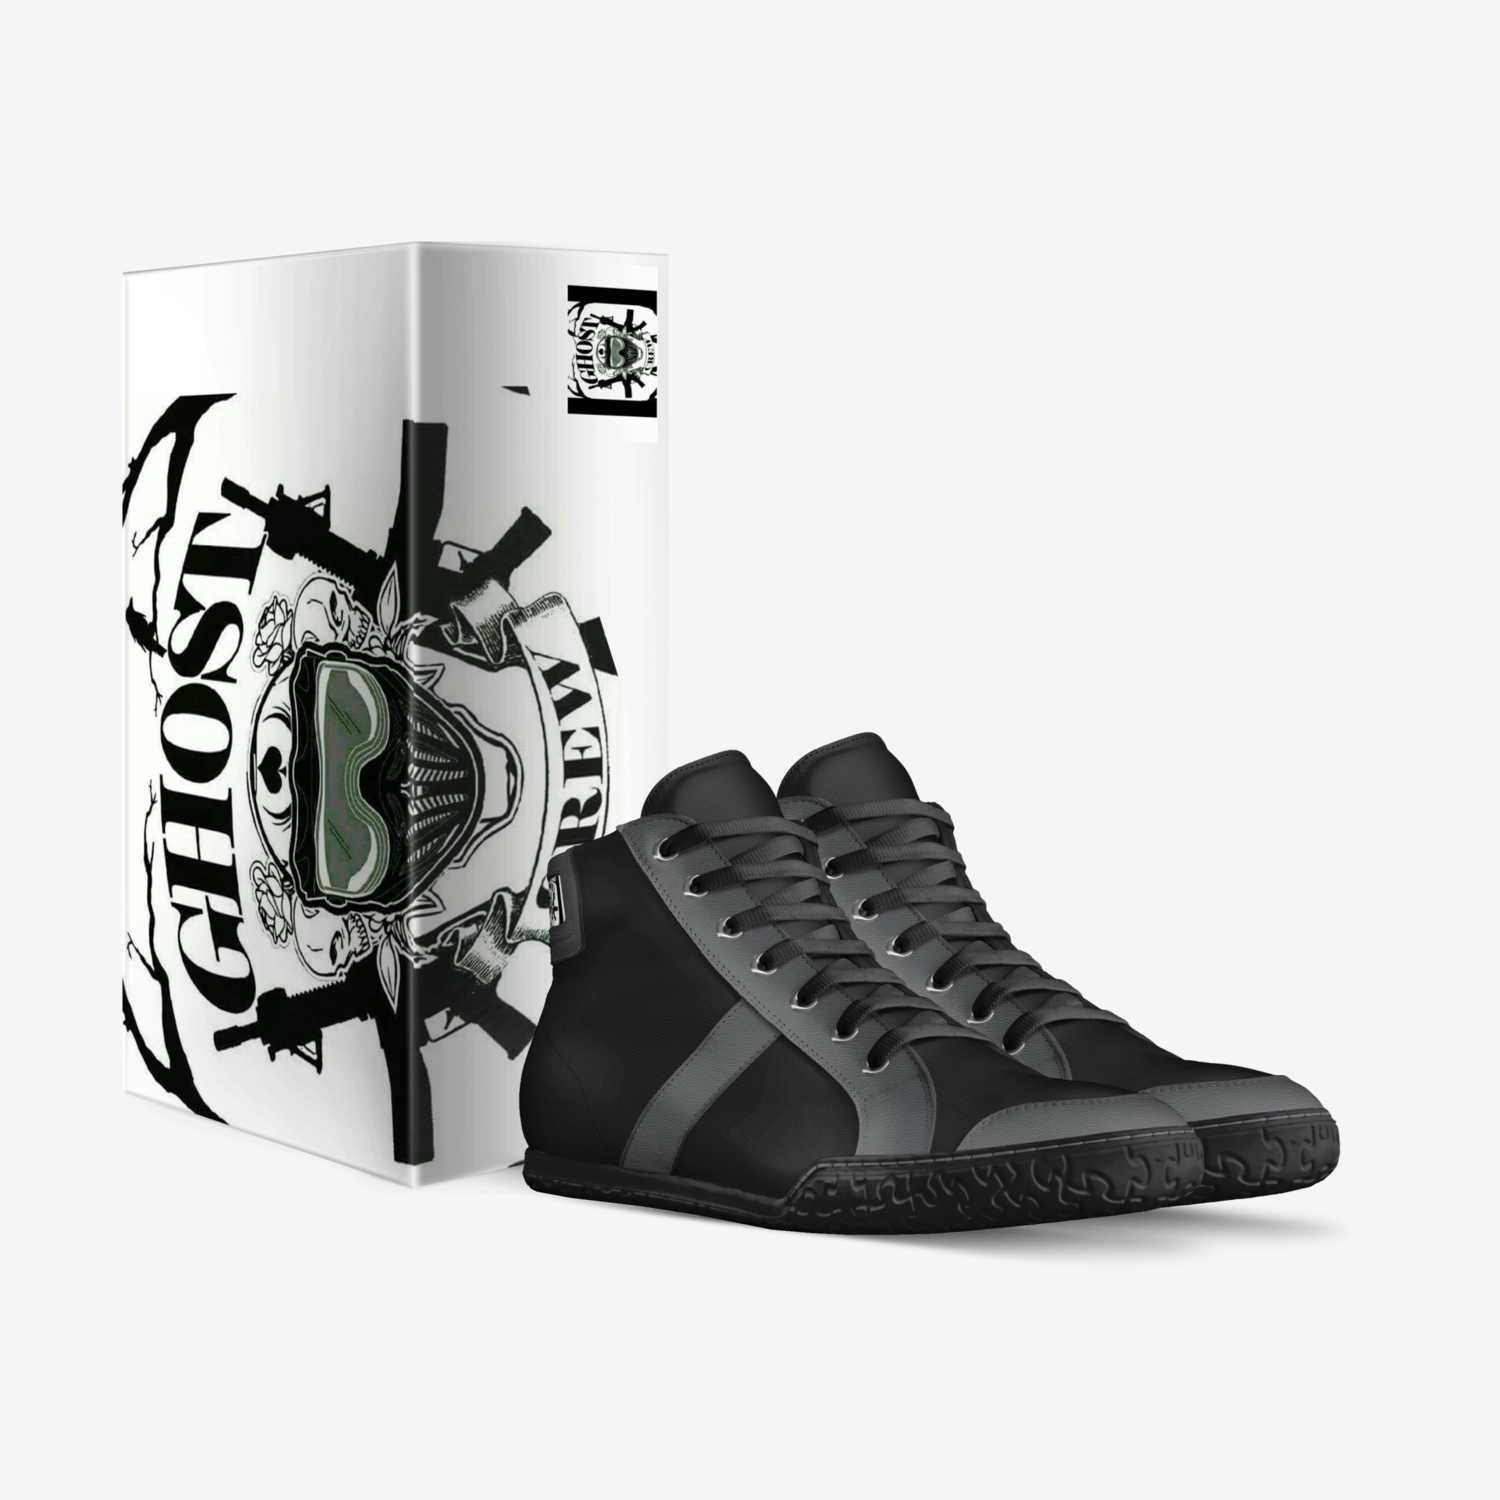 RK GHOST CREW custom made in Italy shoes by Michael Bane | Box view